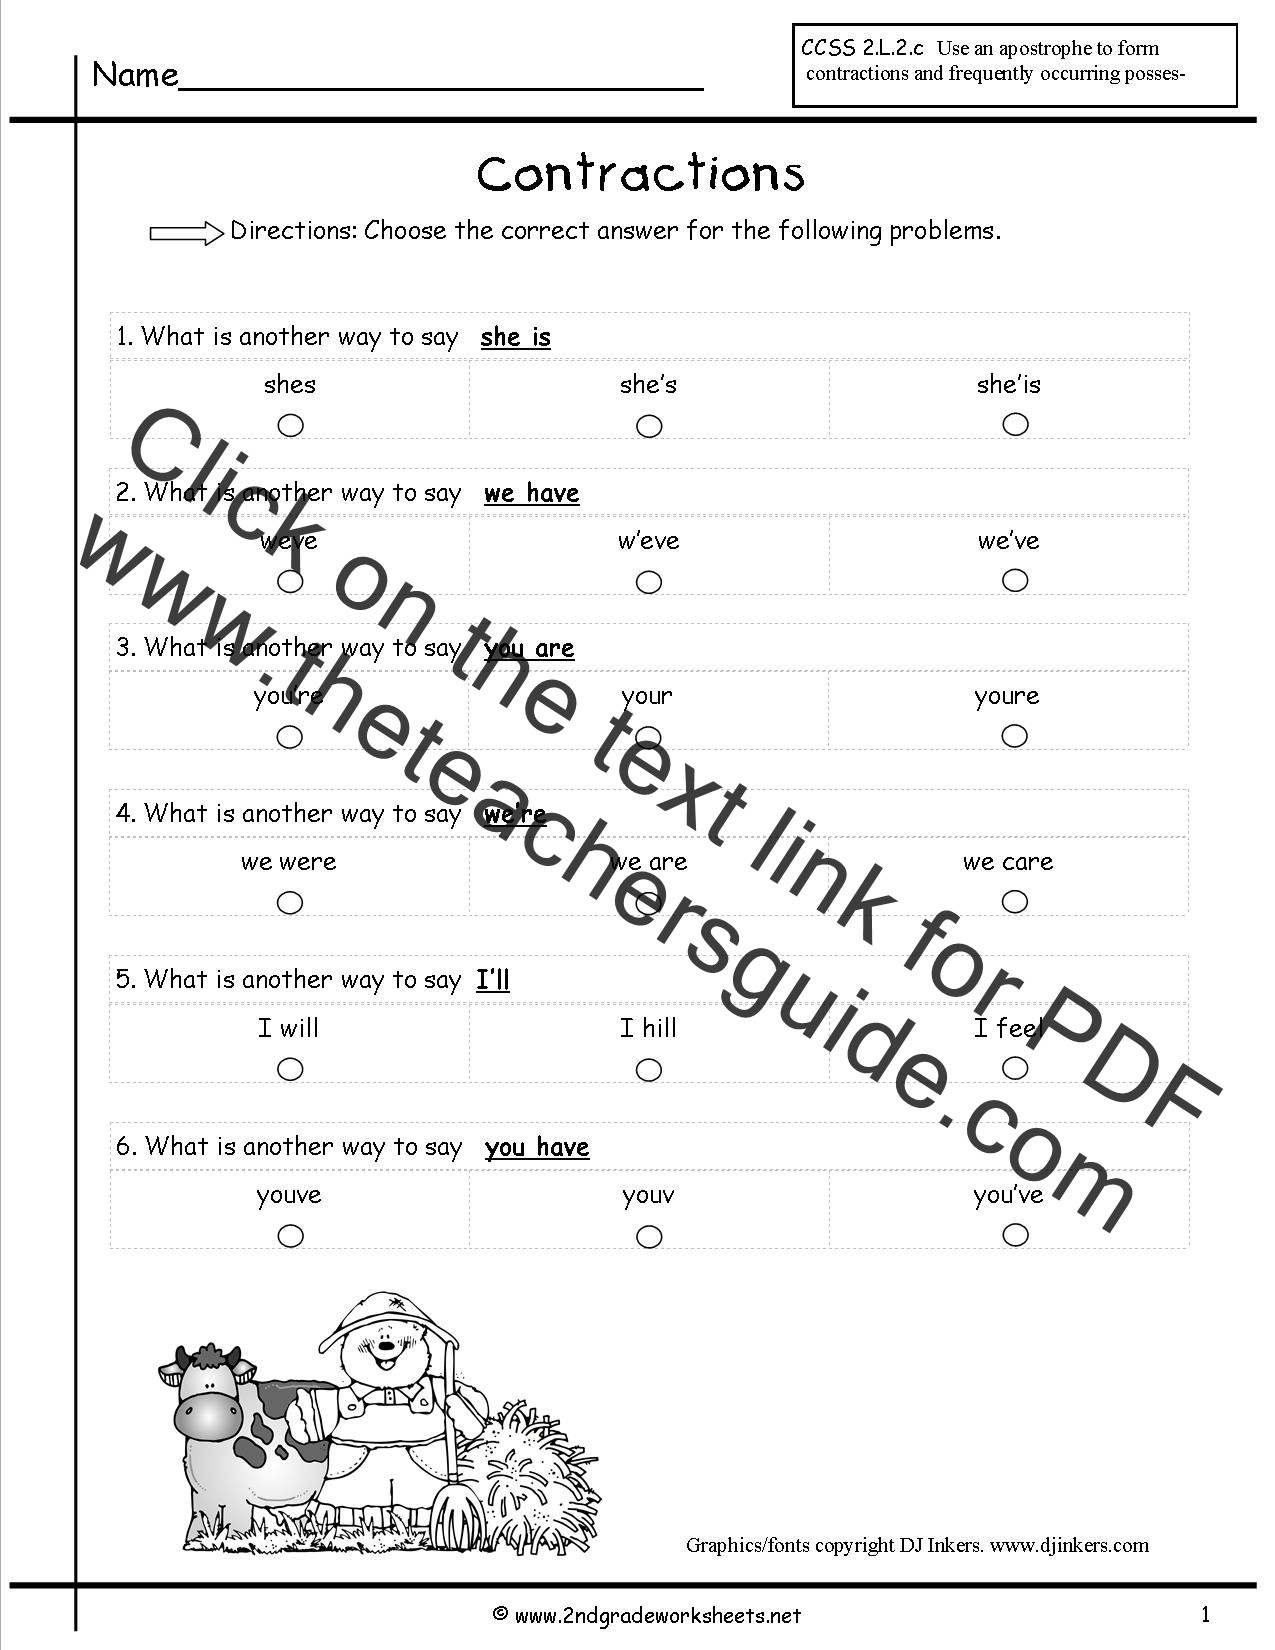 Contractions Worksheet 3rd Grade Free Contractions Worksheets and Printouts